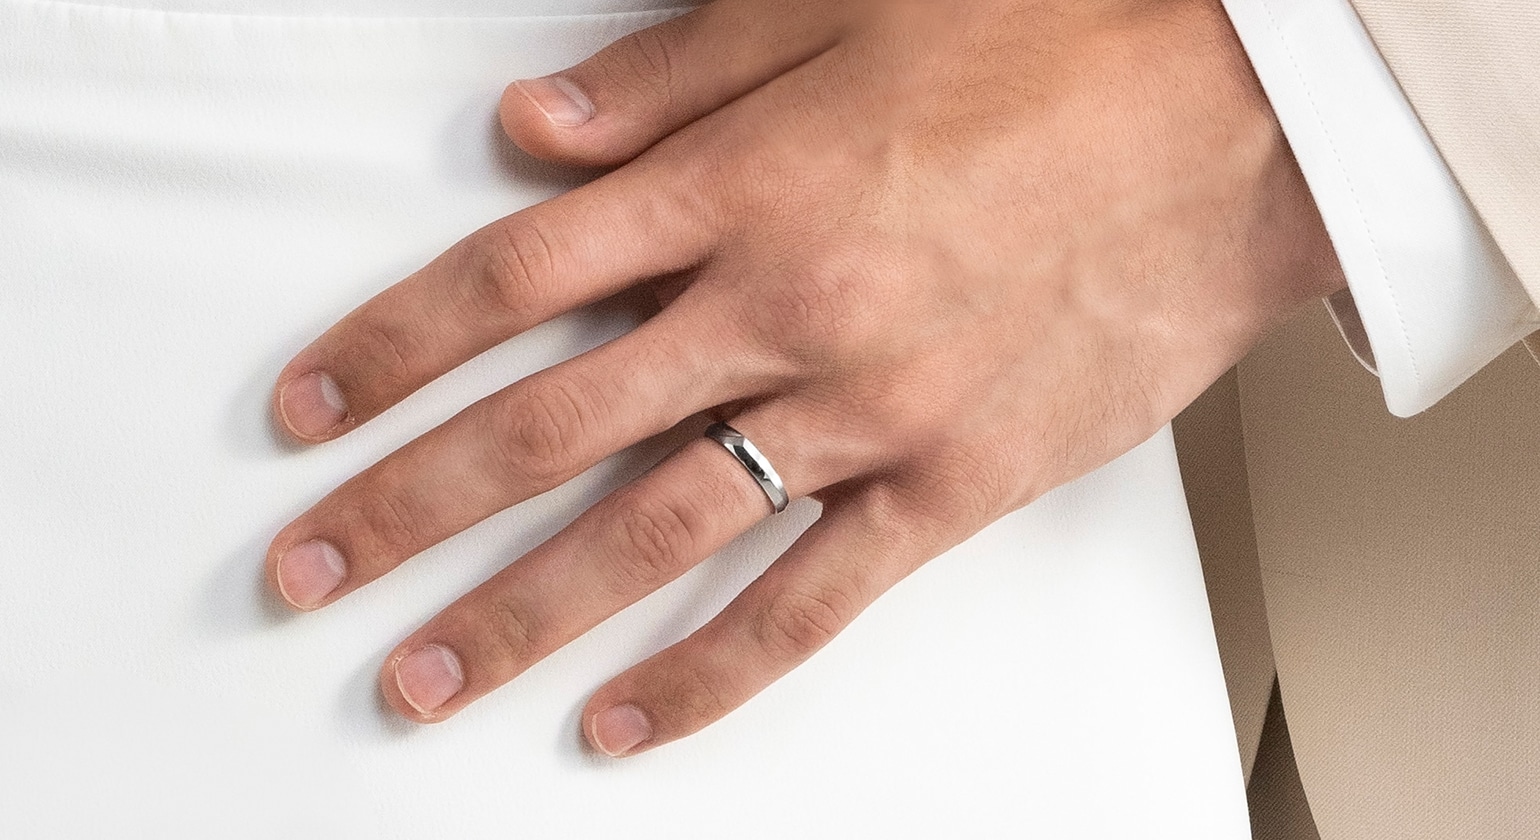 A male hand wearing a wedding band